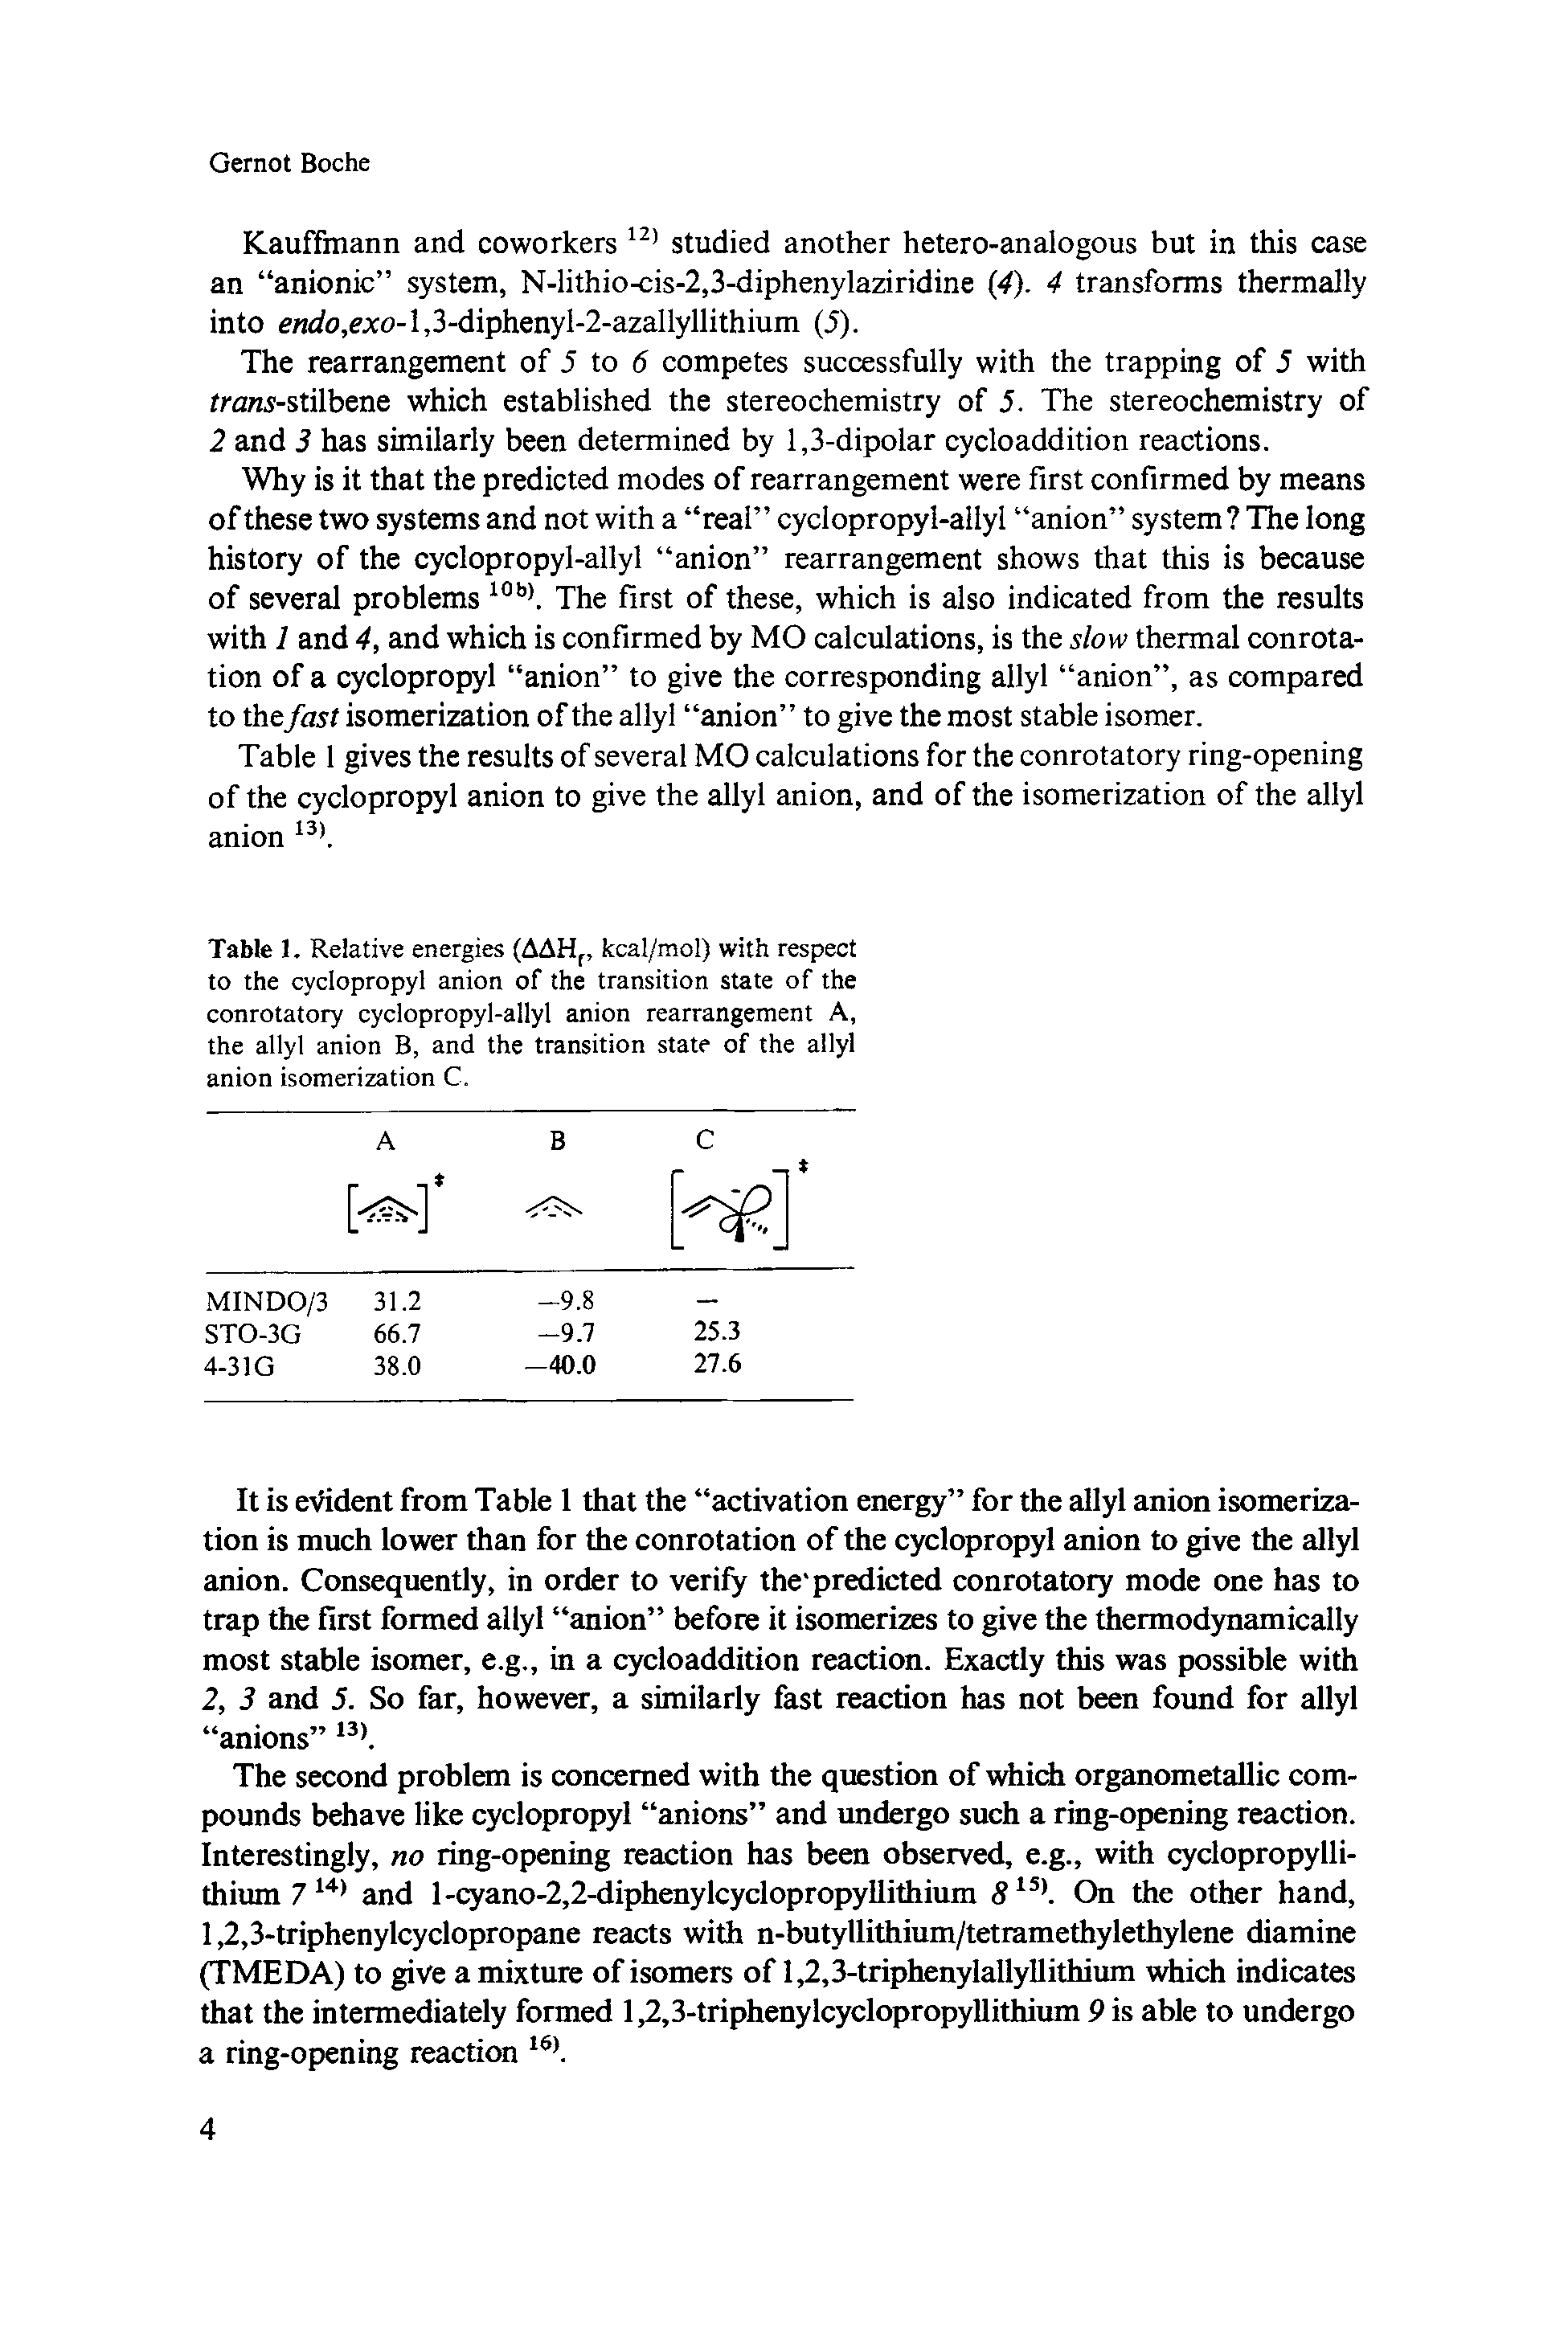 Table 1. Relative energies (AAHf, kcal/mol) with respect to the cyclopropyl anion of the transition state of the conrotatory cyclopropyl-allyl anion rearrangement A, the allyl anion B, and the transition state of the allyl anion isomerization C.